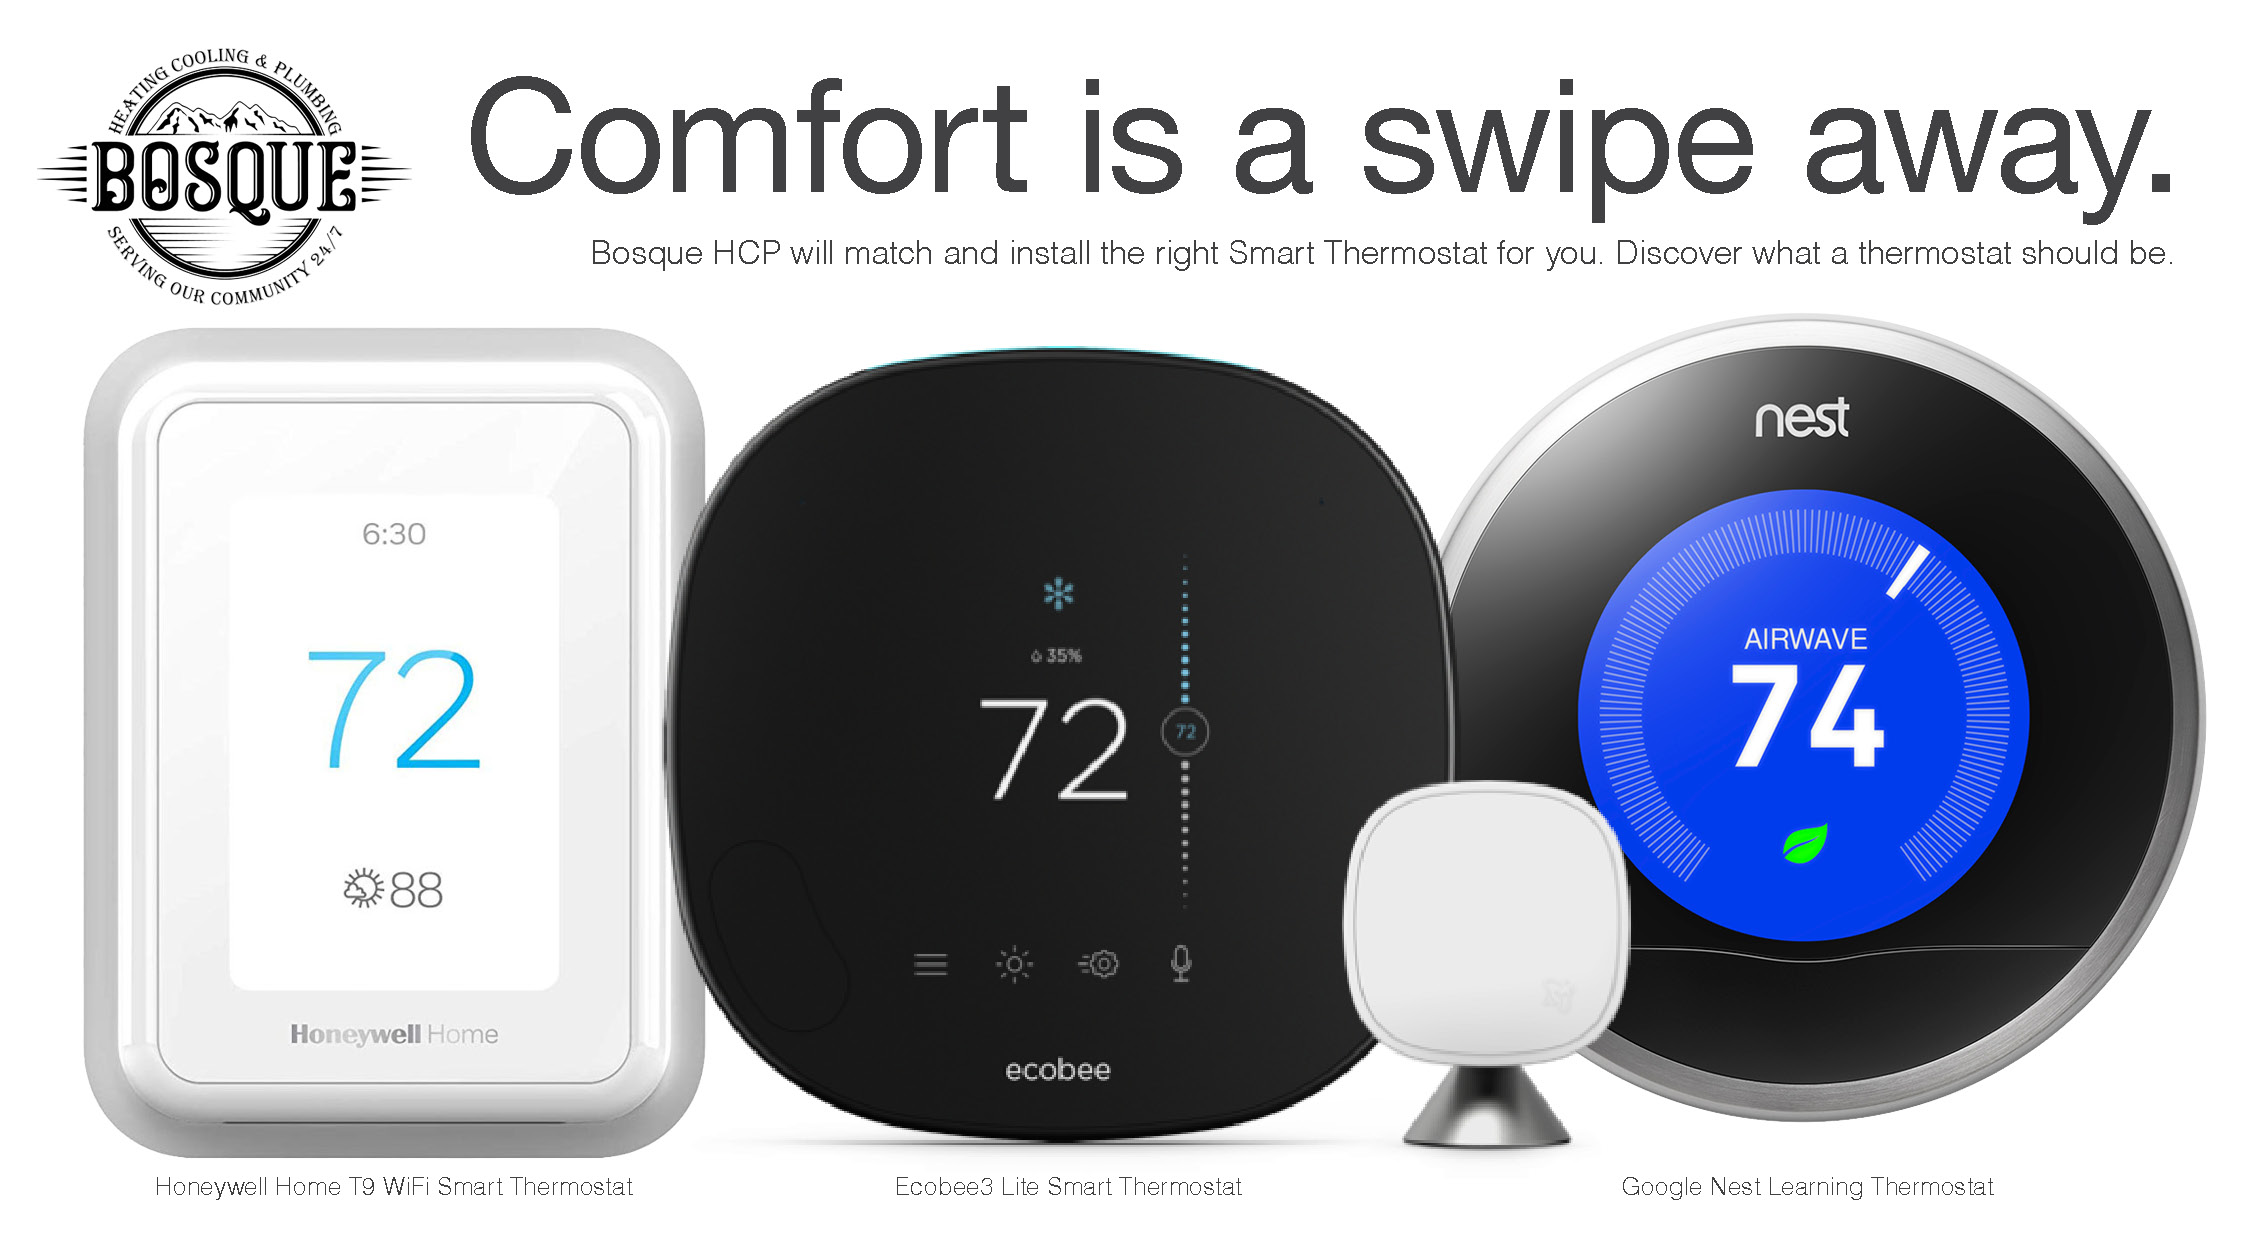 Image of three different smart thermostats—Nest, ecobee, and Honeywell